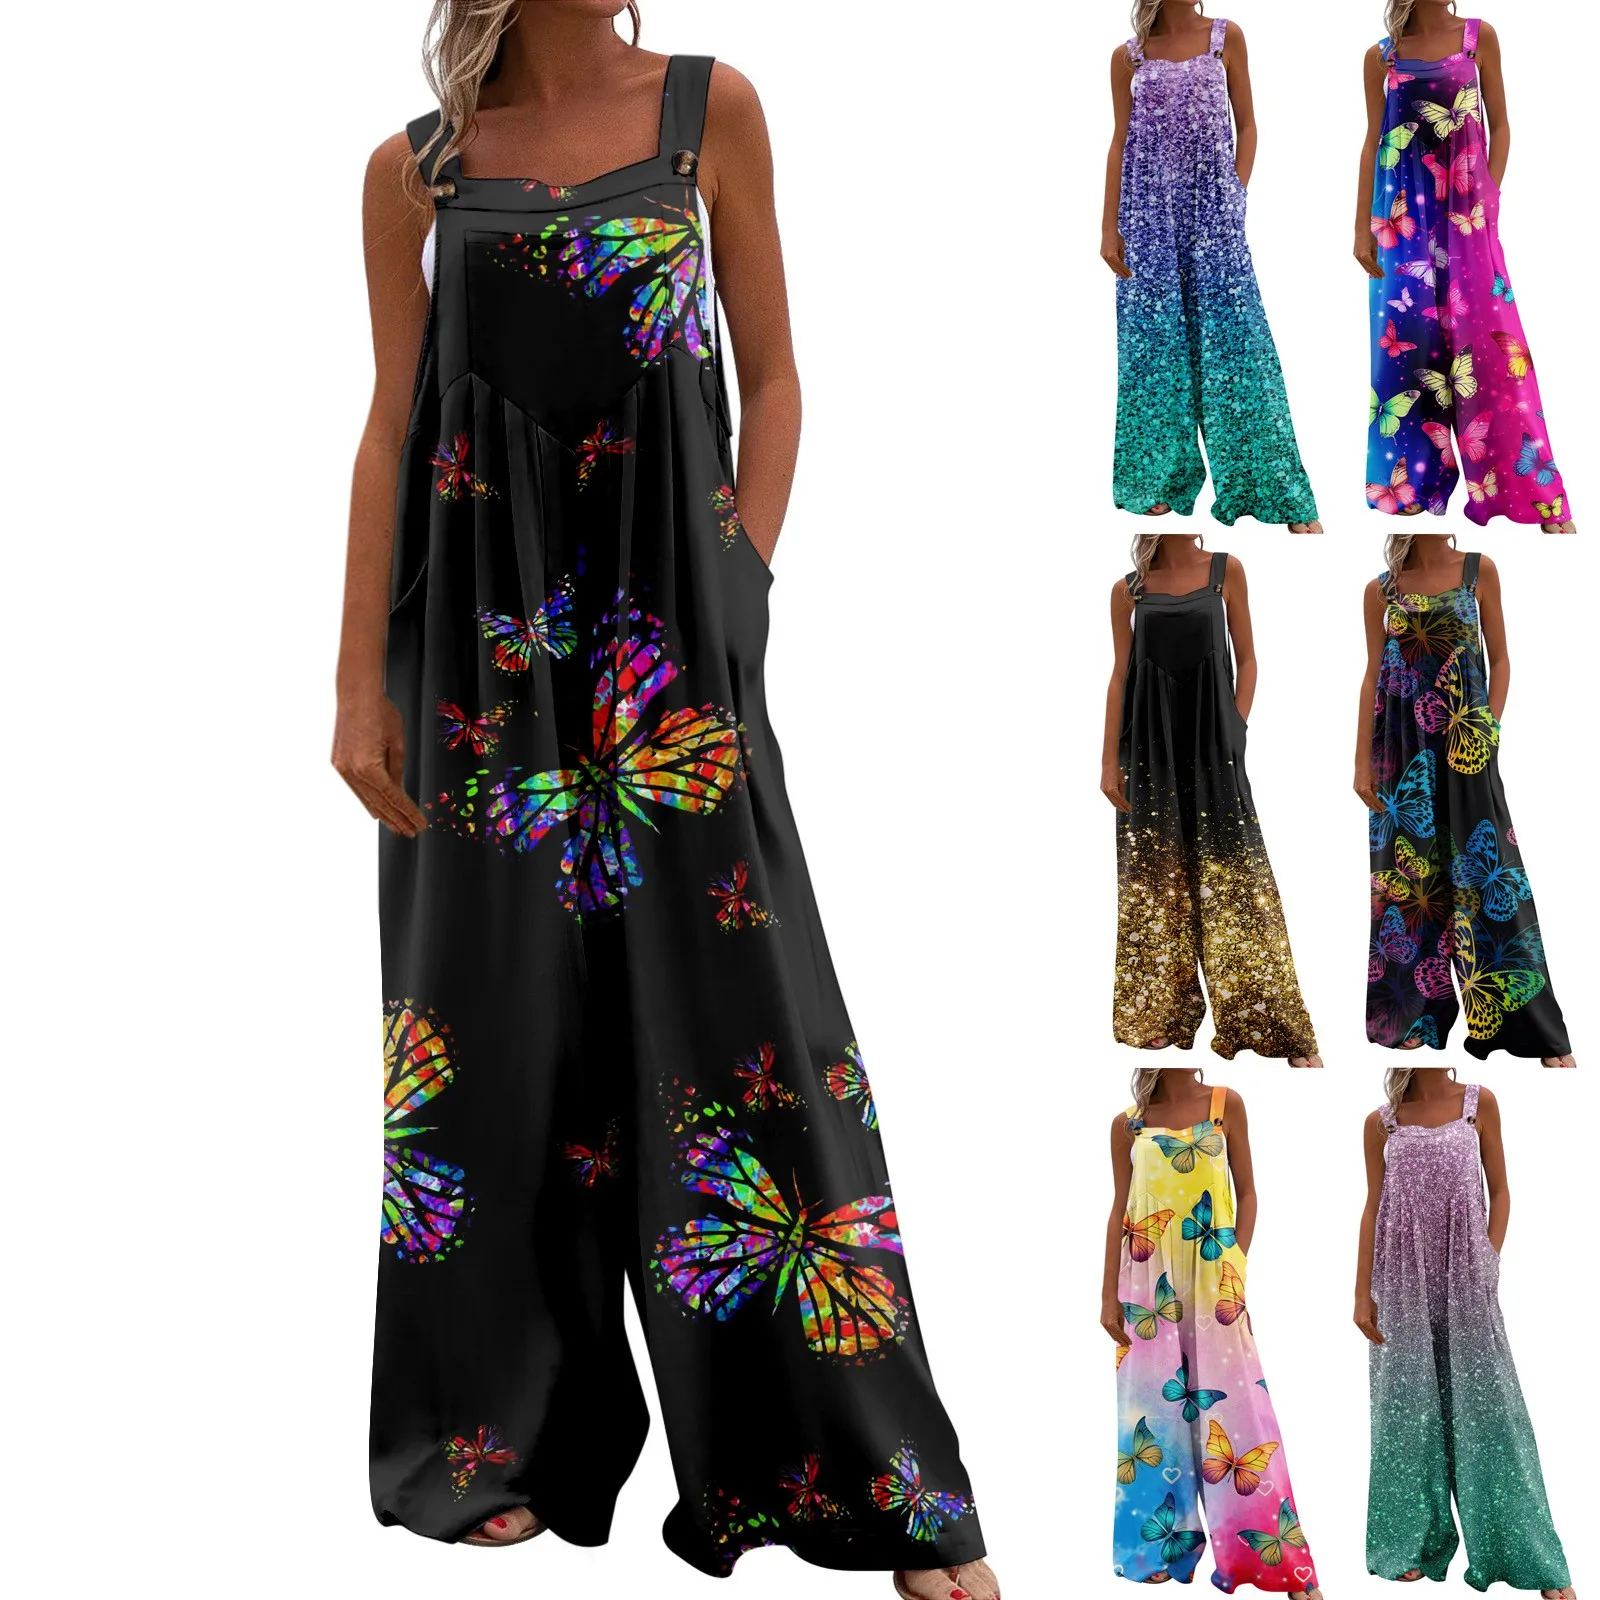 

Womens Overalls Casual Print Wide Leg Jumpsuits Sleeveless Straps With Pockets Fashion Temperament Jumpsuits monos largos